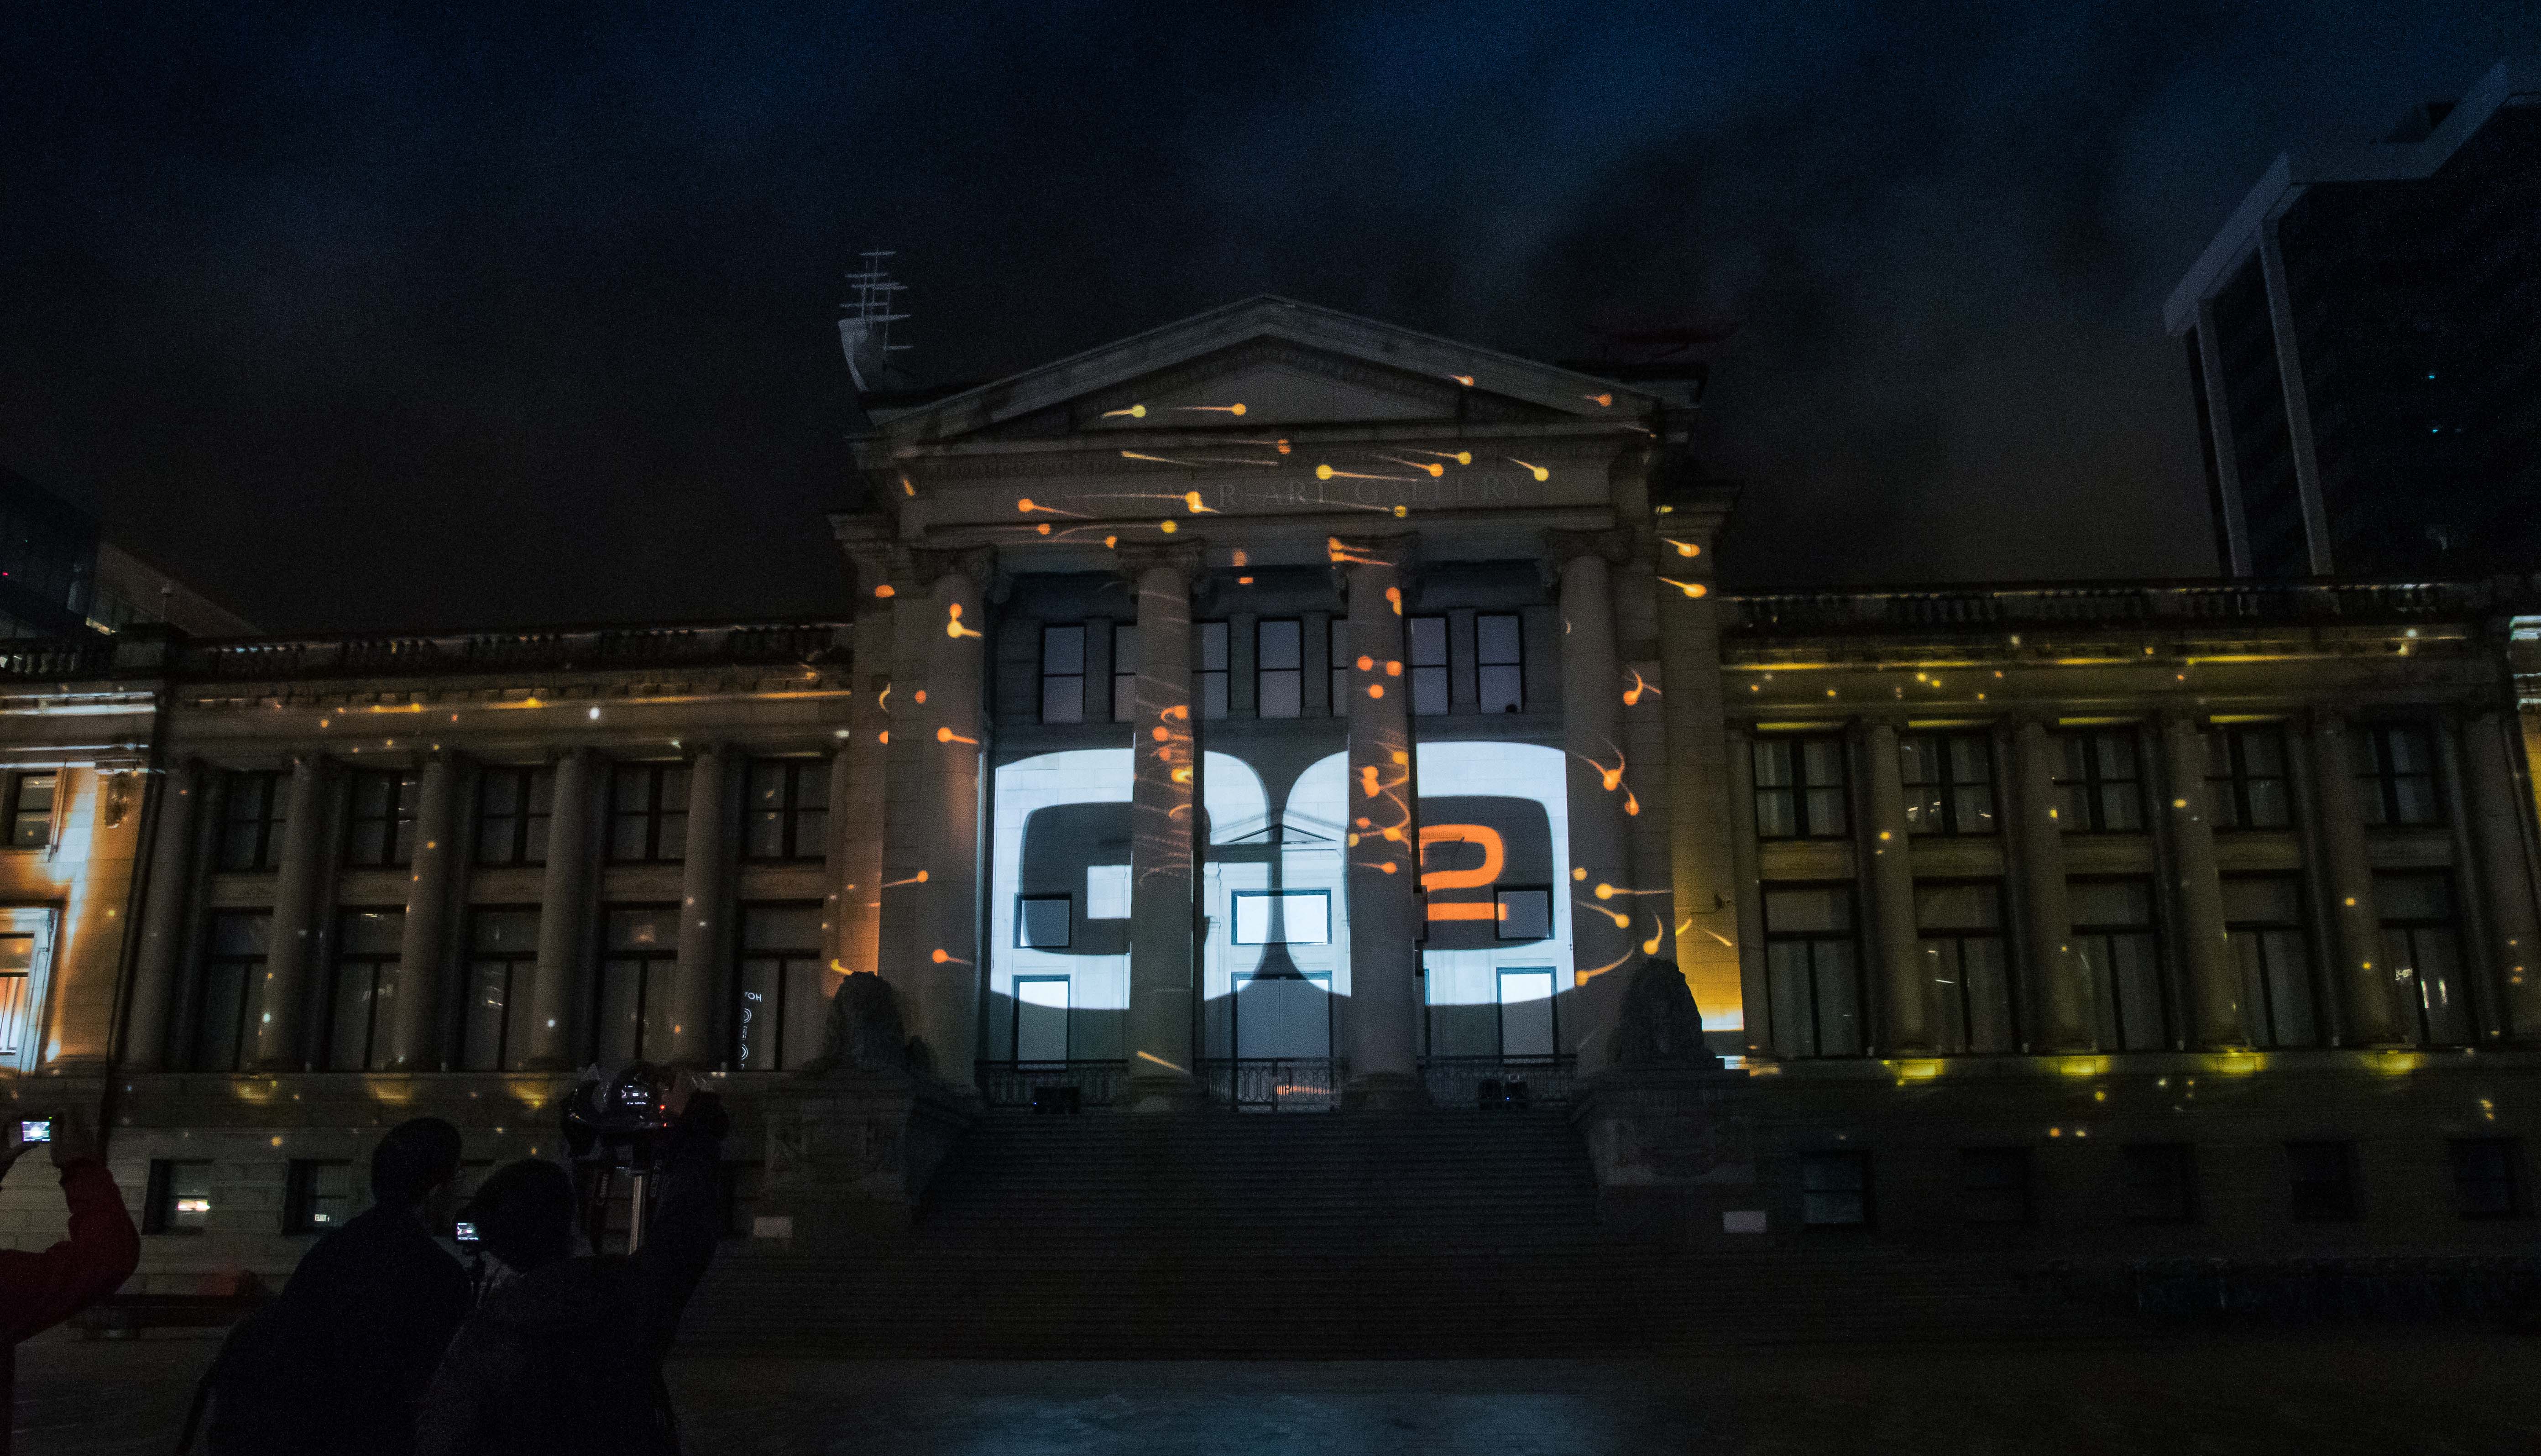 go2productions_facadefest_projectionmapping13-1600x740 Facade Festival 2019